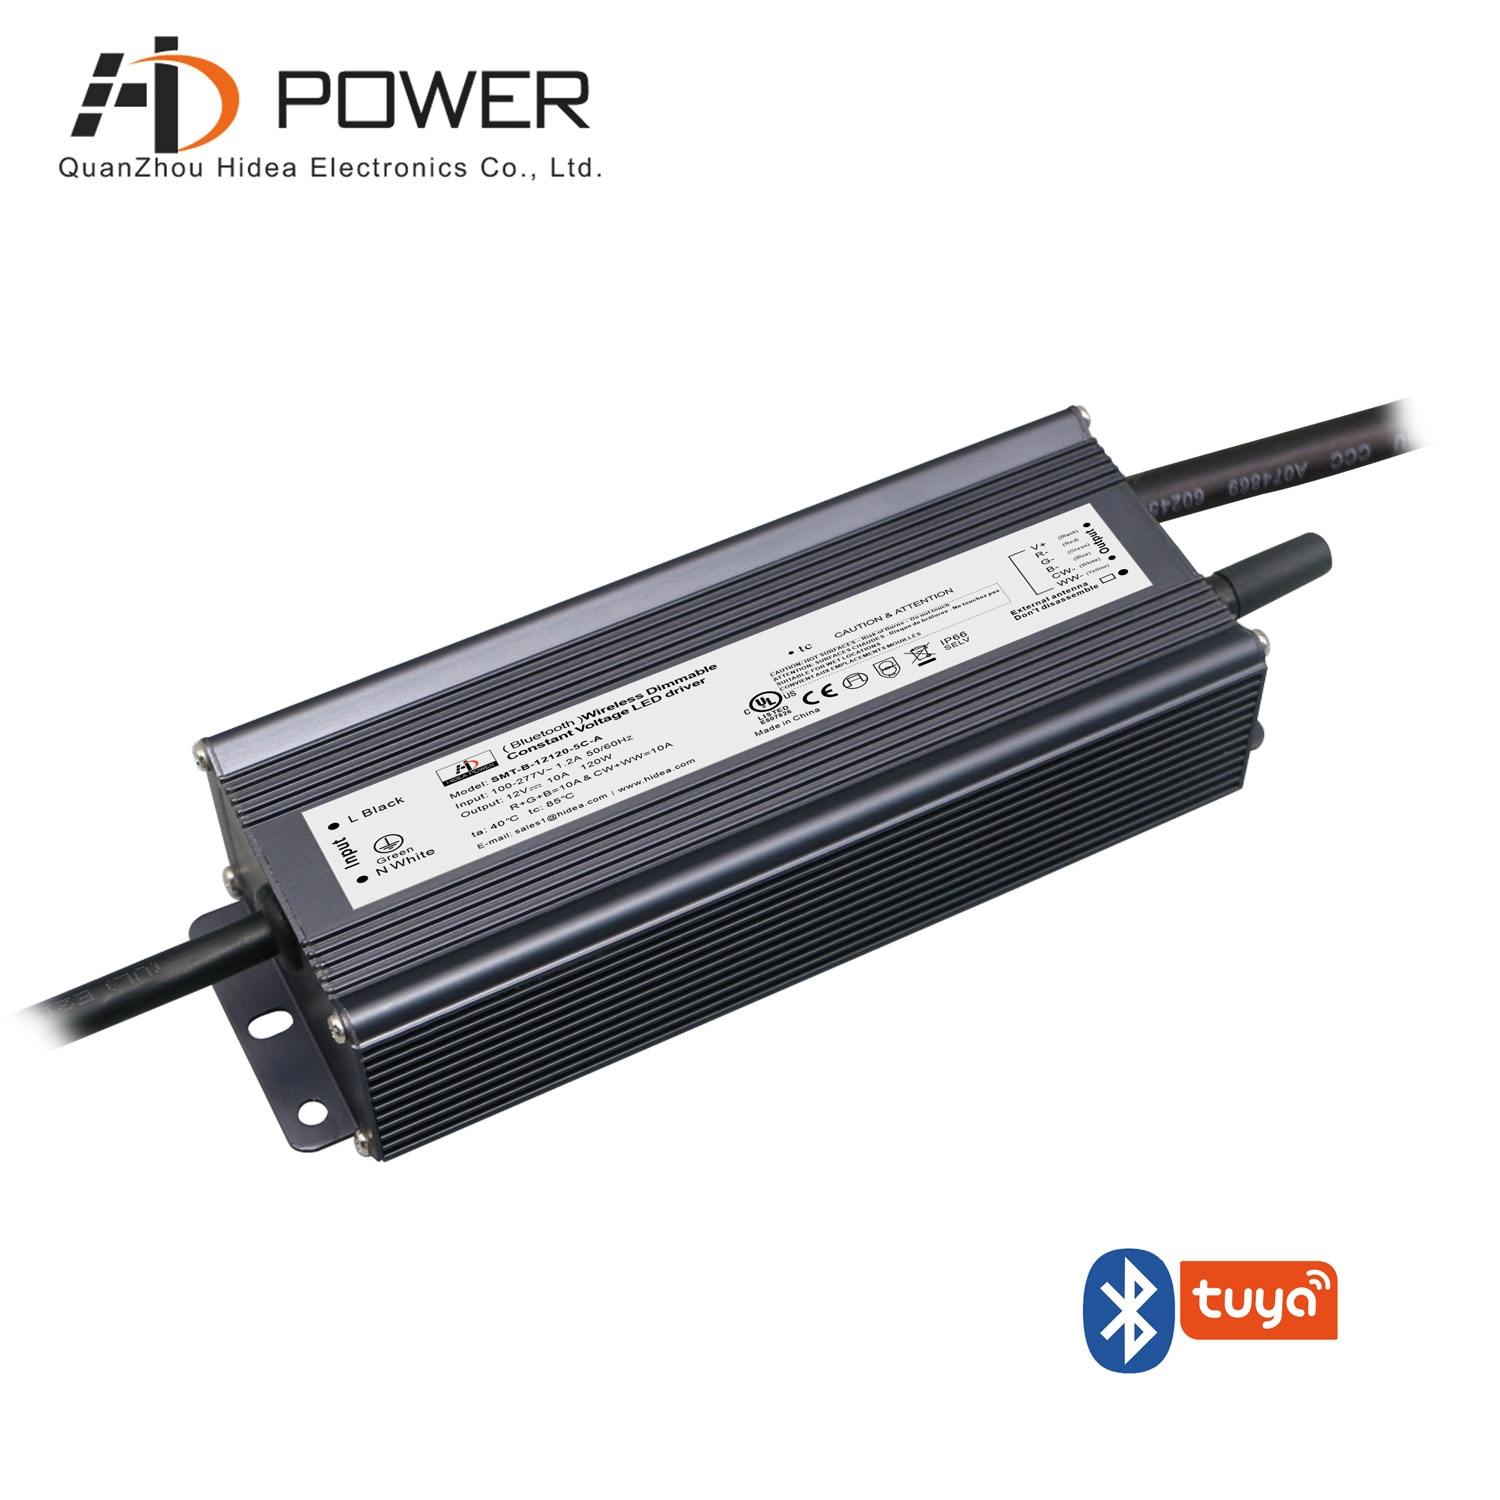 Driver led dimmerabile bluetooth multicanale IP67 120w per luci RGBCW